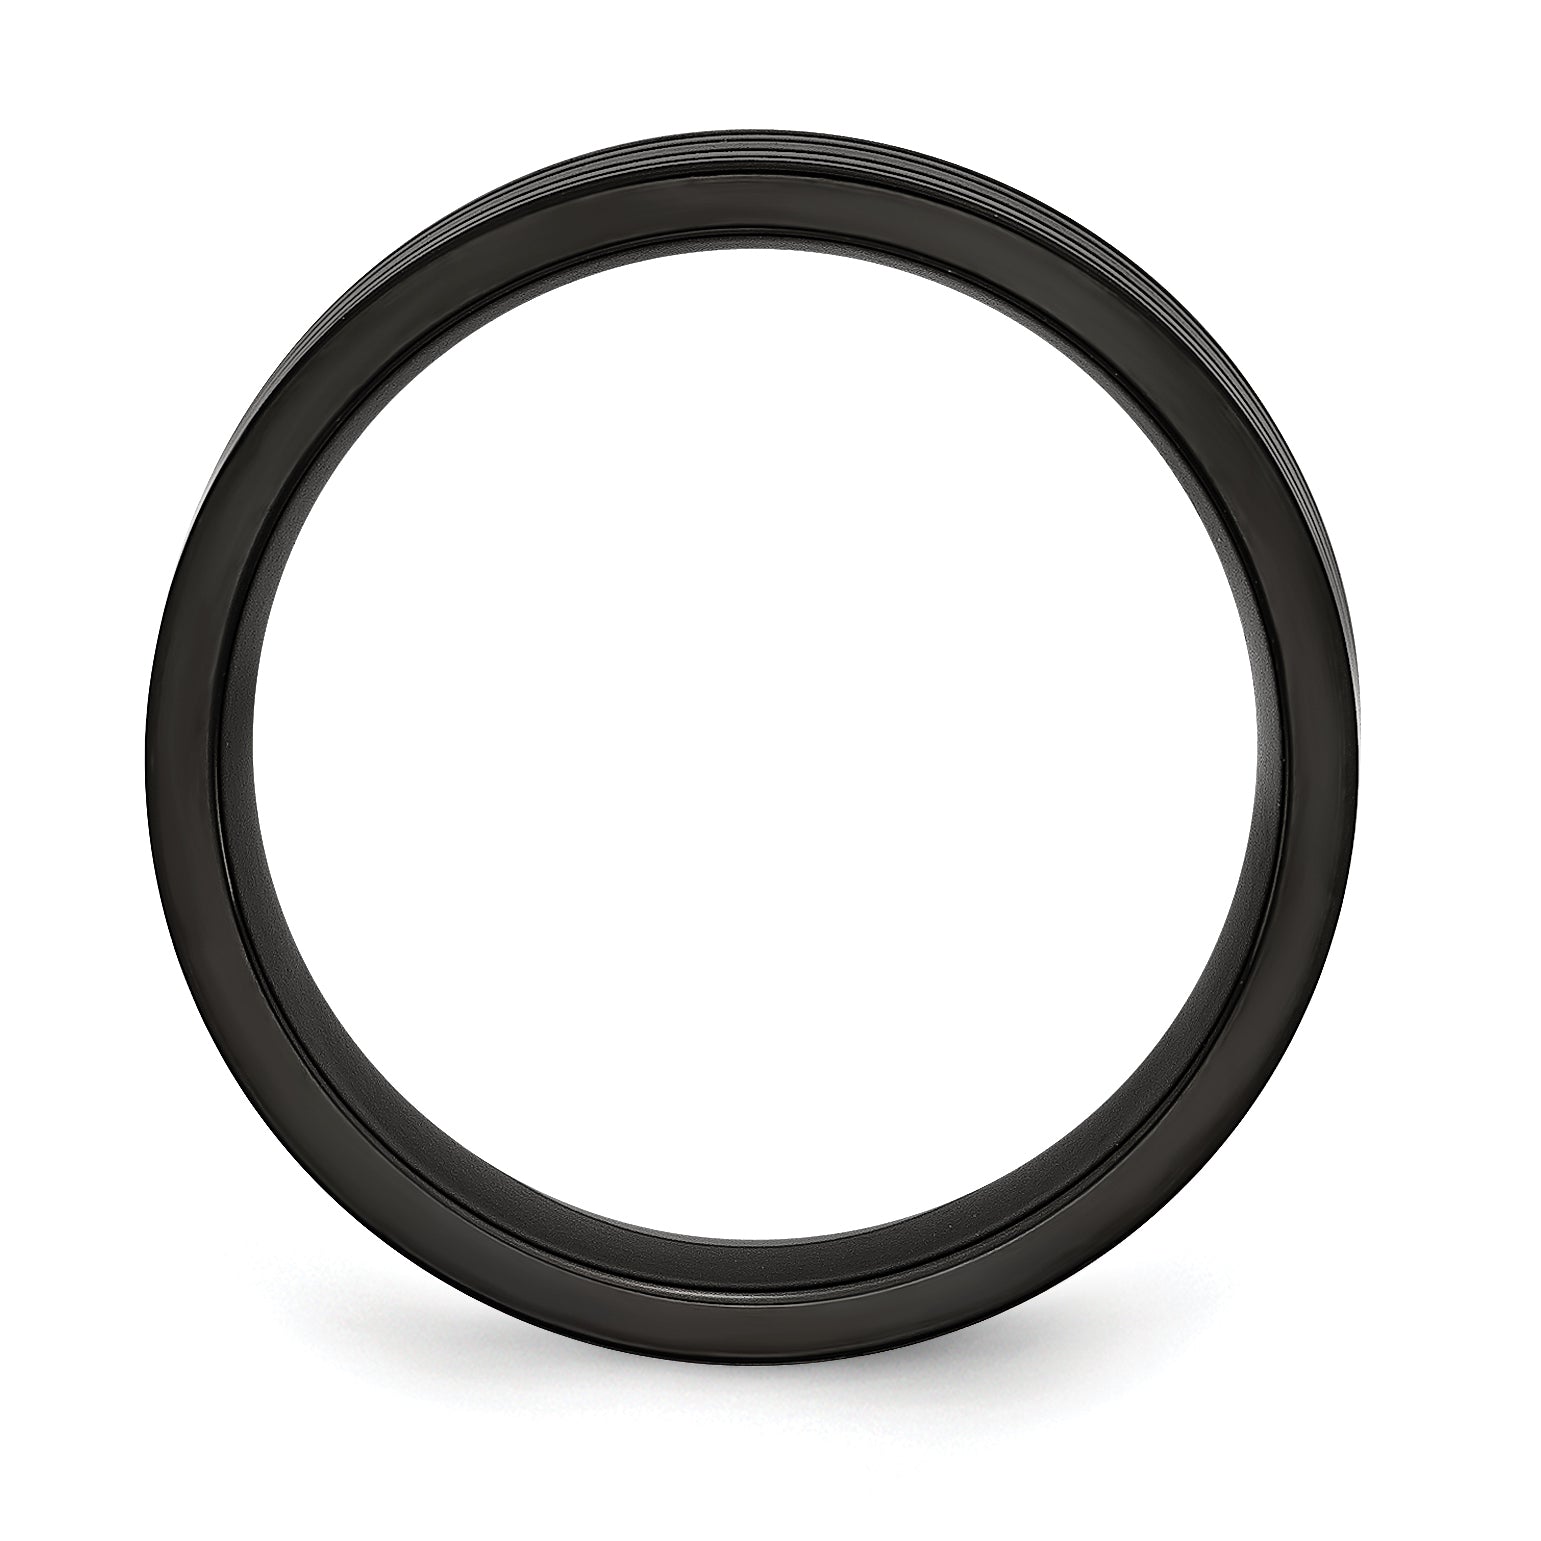 Titanium Brushed and Polished Black IP-plated 6mm Grooved Band